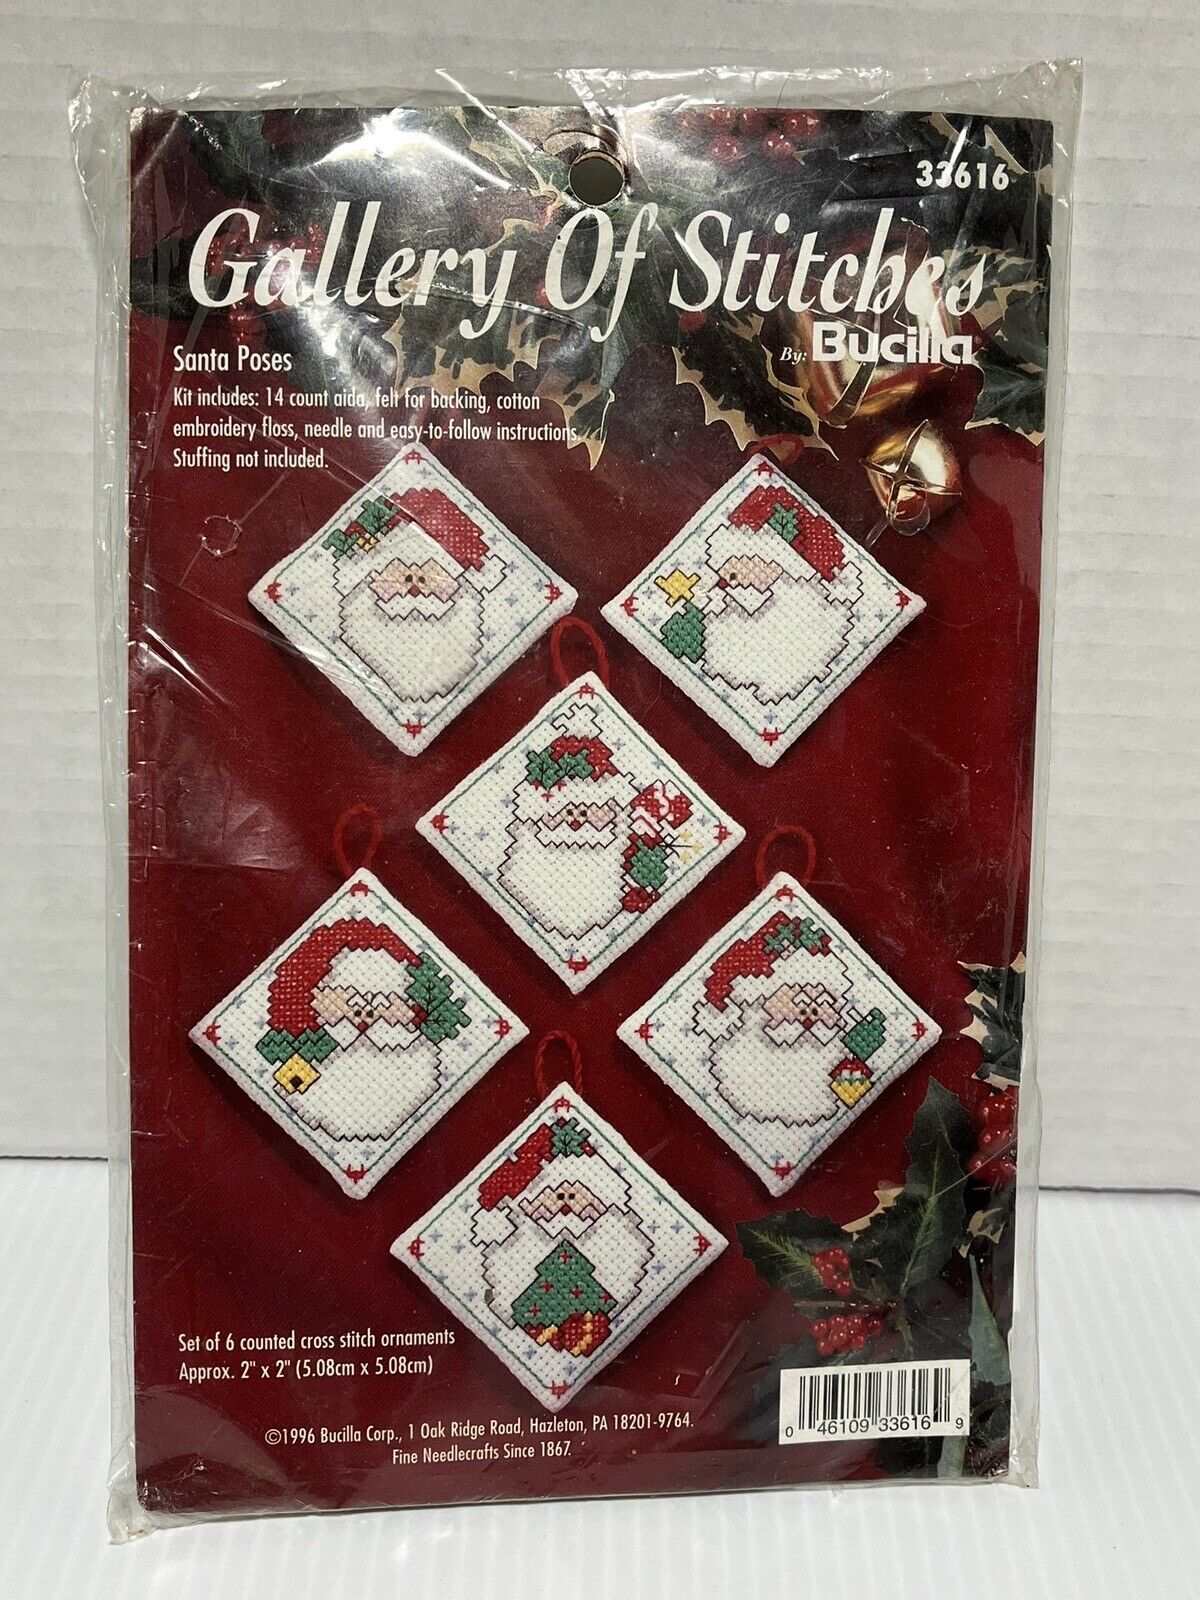 NEW Bucilla 33616 Gallery Of Stitches Holiday Ornaments Santas Set of 6 Sealed